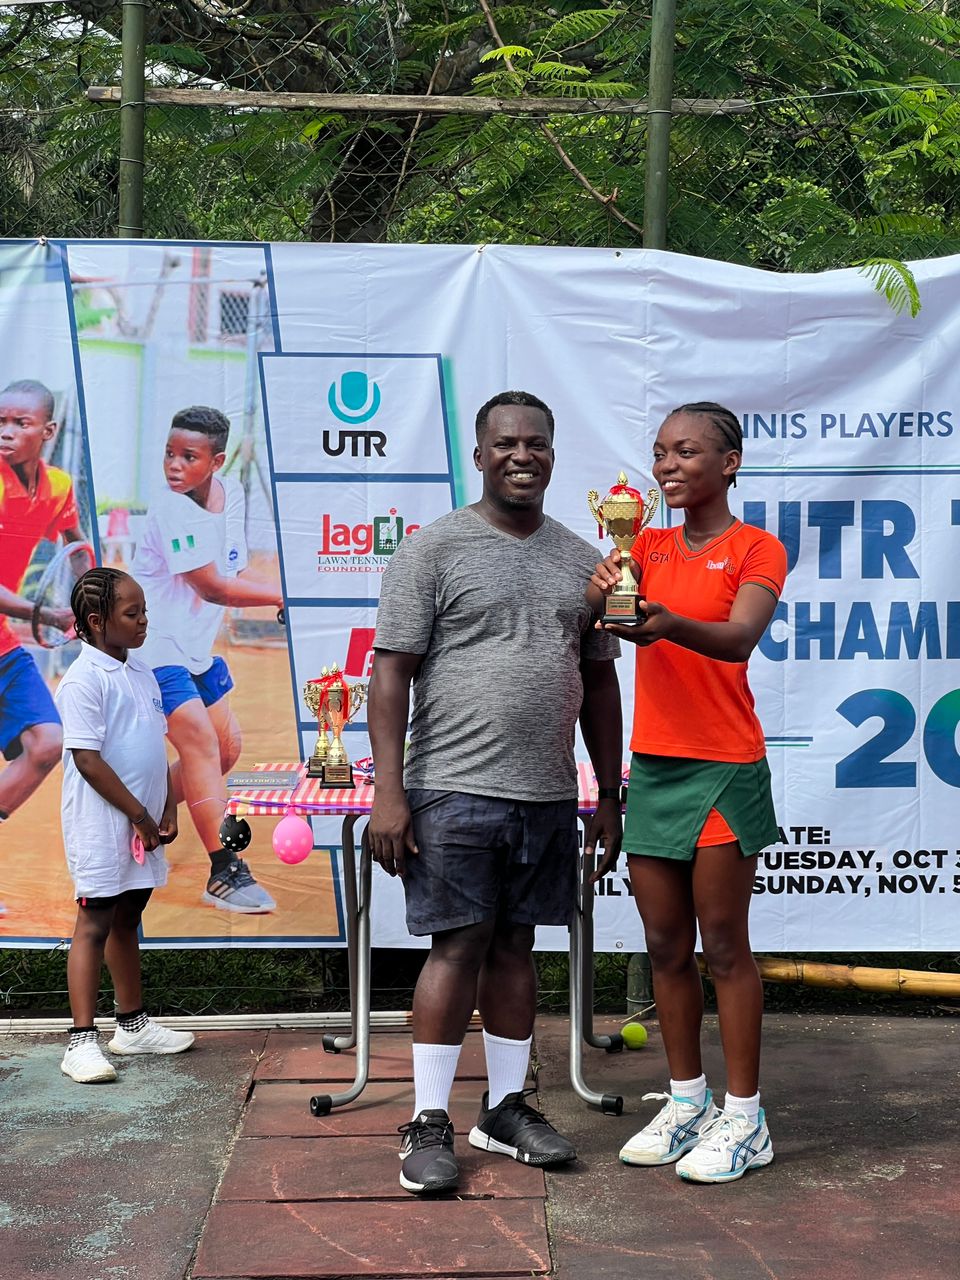 Photos: Akwa-Ibom Region Produces UTR Winners For The First Time